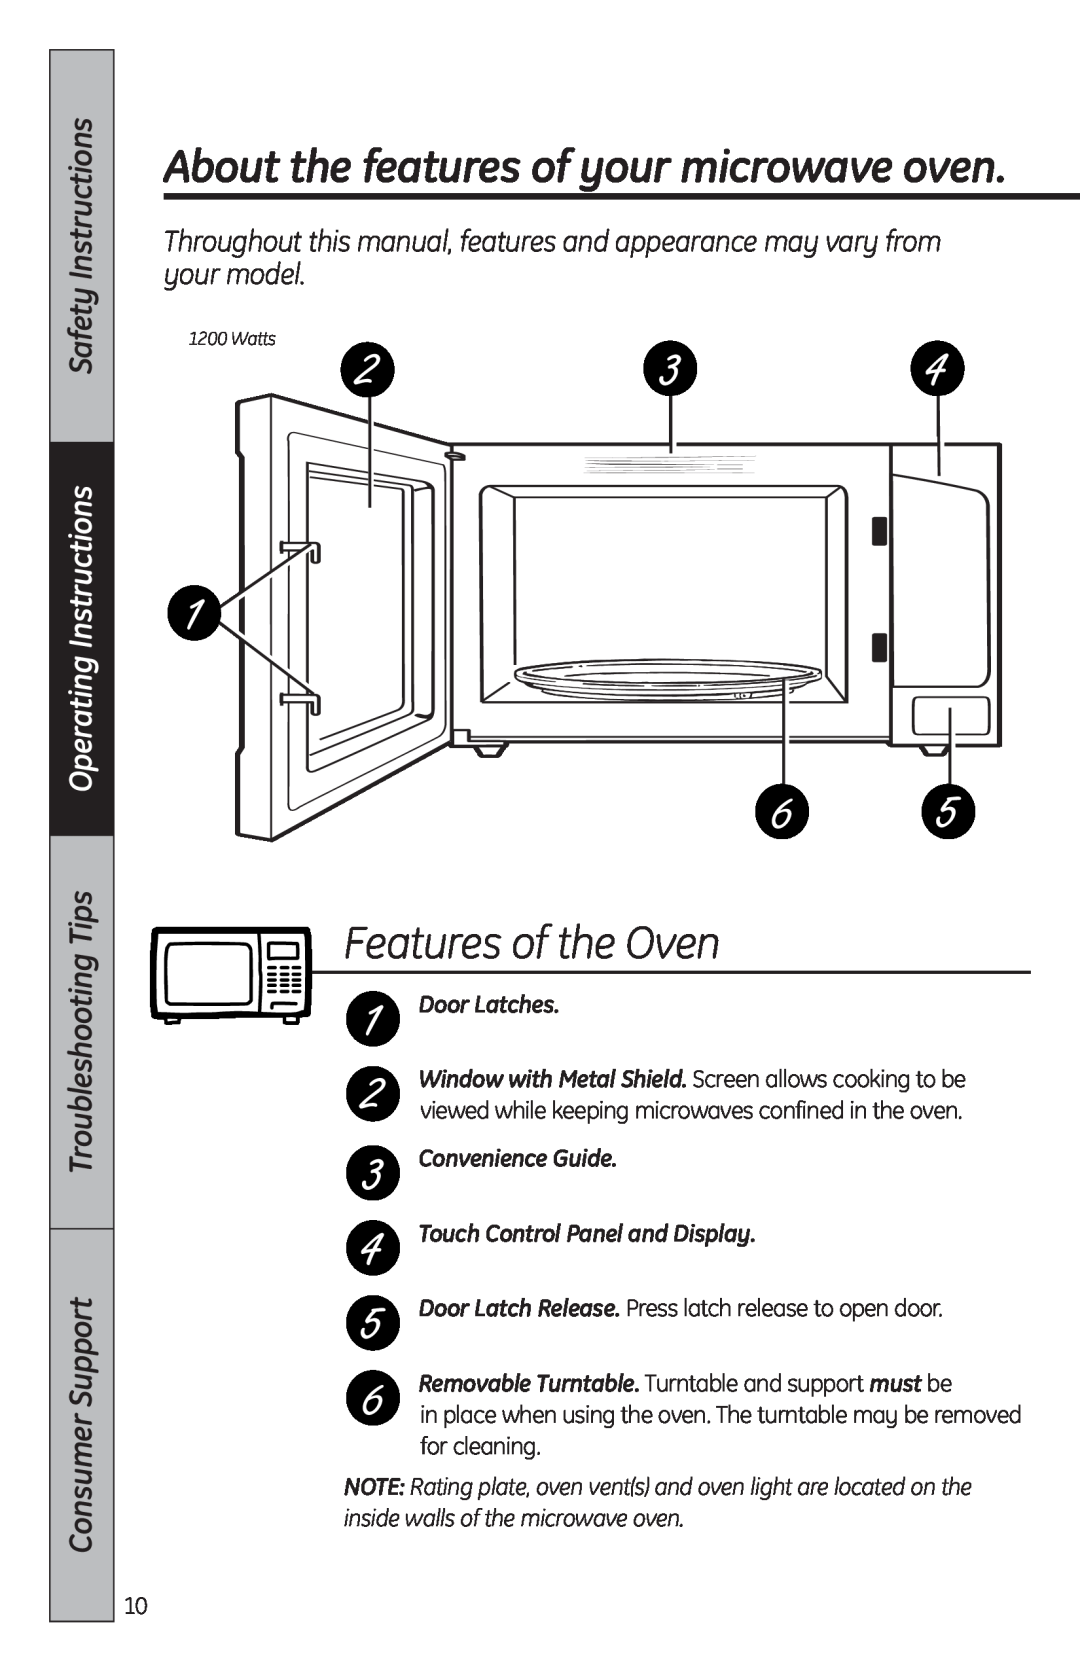 GE MFL38268203 About the features of your microwave oven, Features of the Oven, Safety Instructions, Consumer Support 